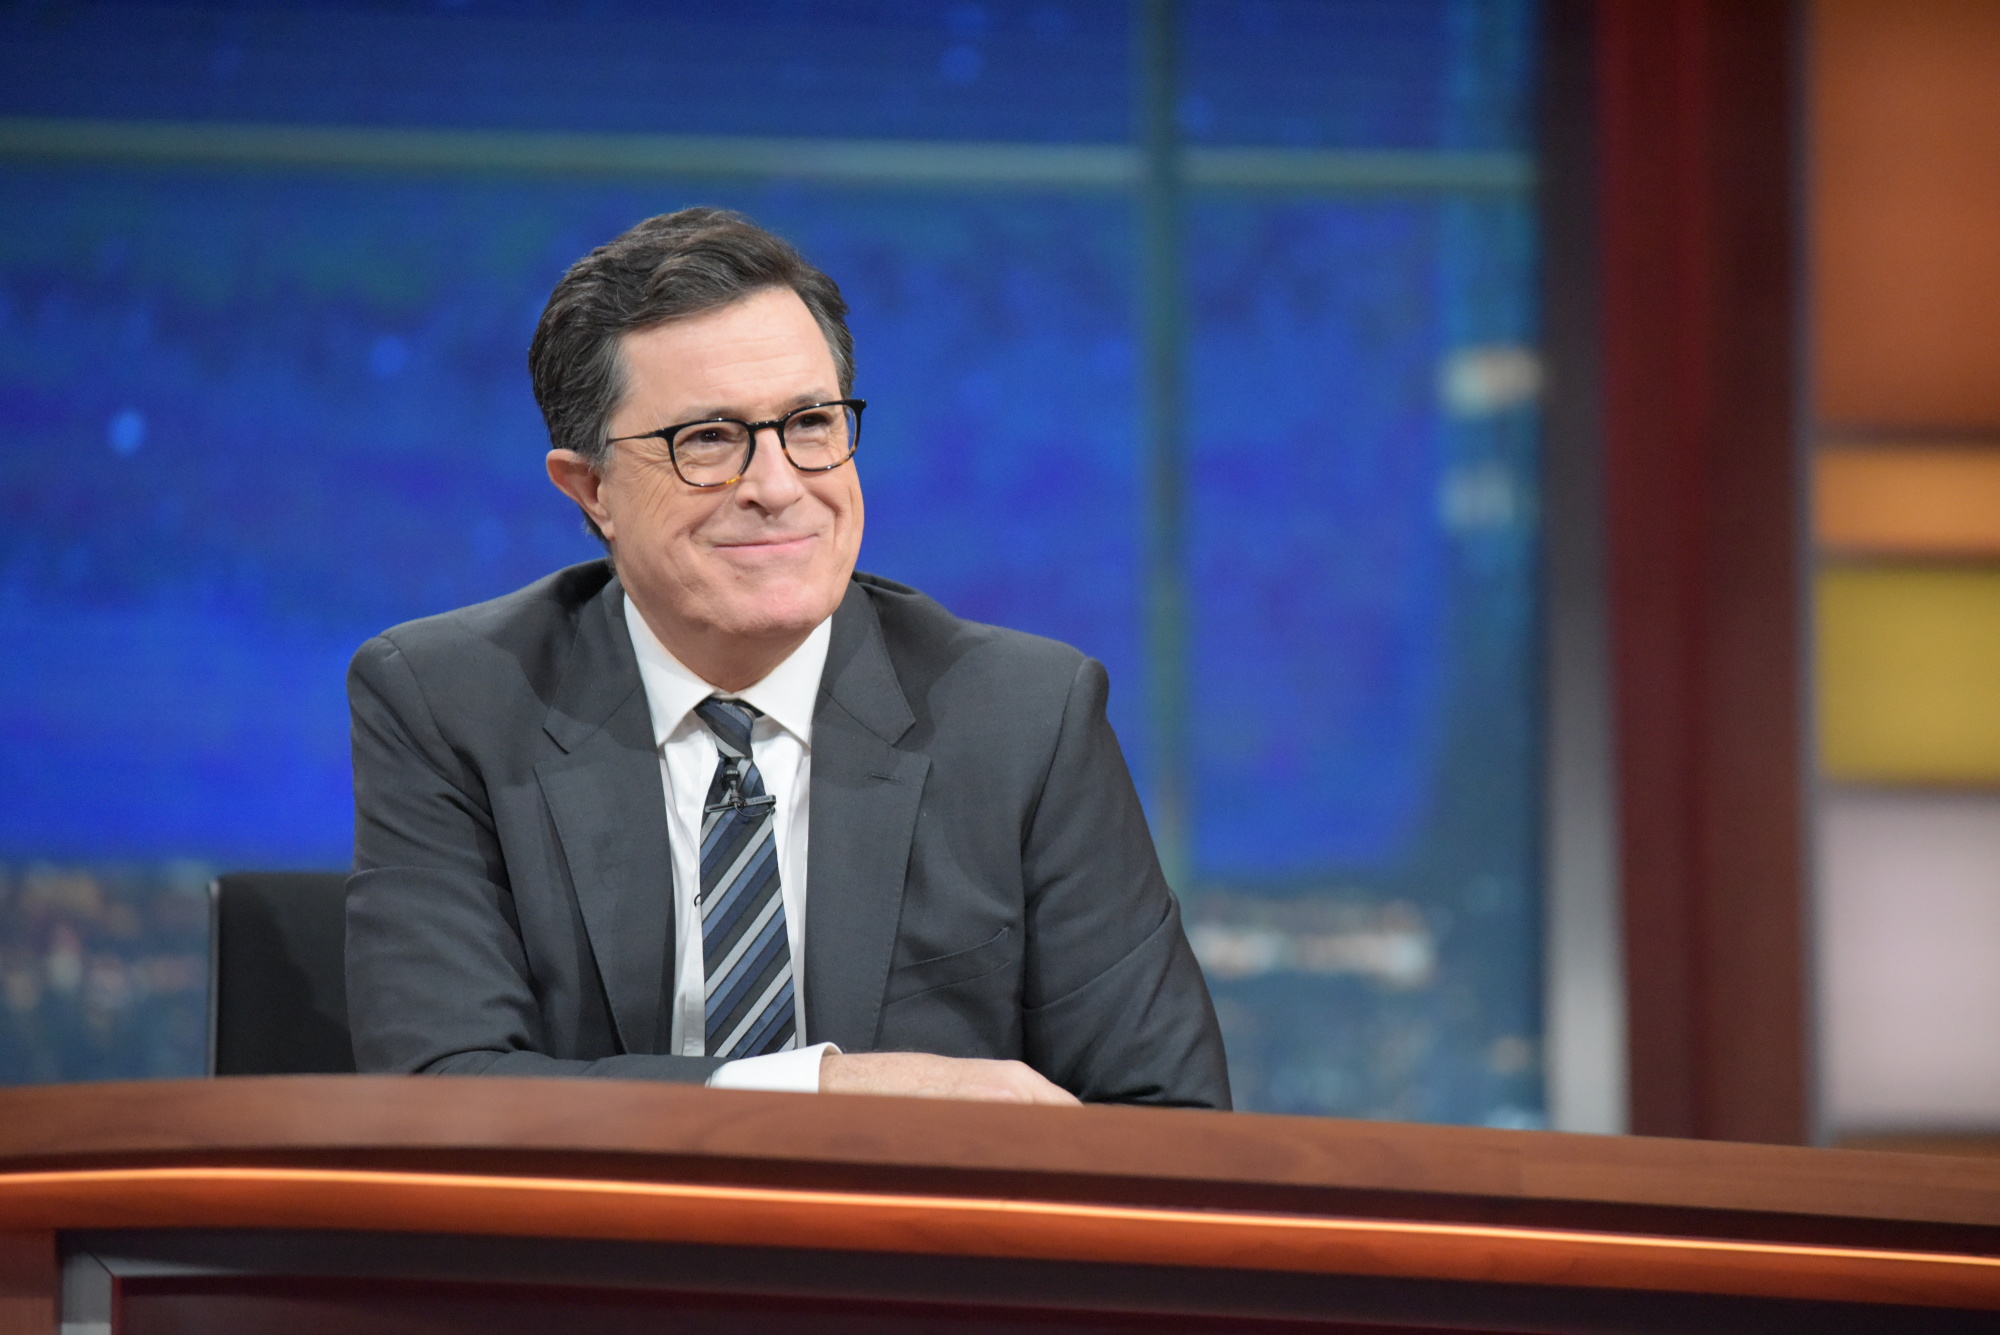 The Late Show with Stephen Colbert (CBS/Getty Images)